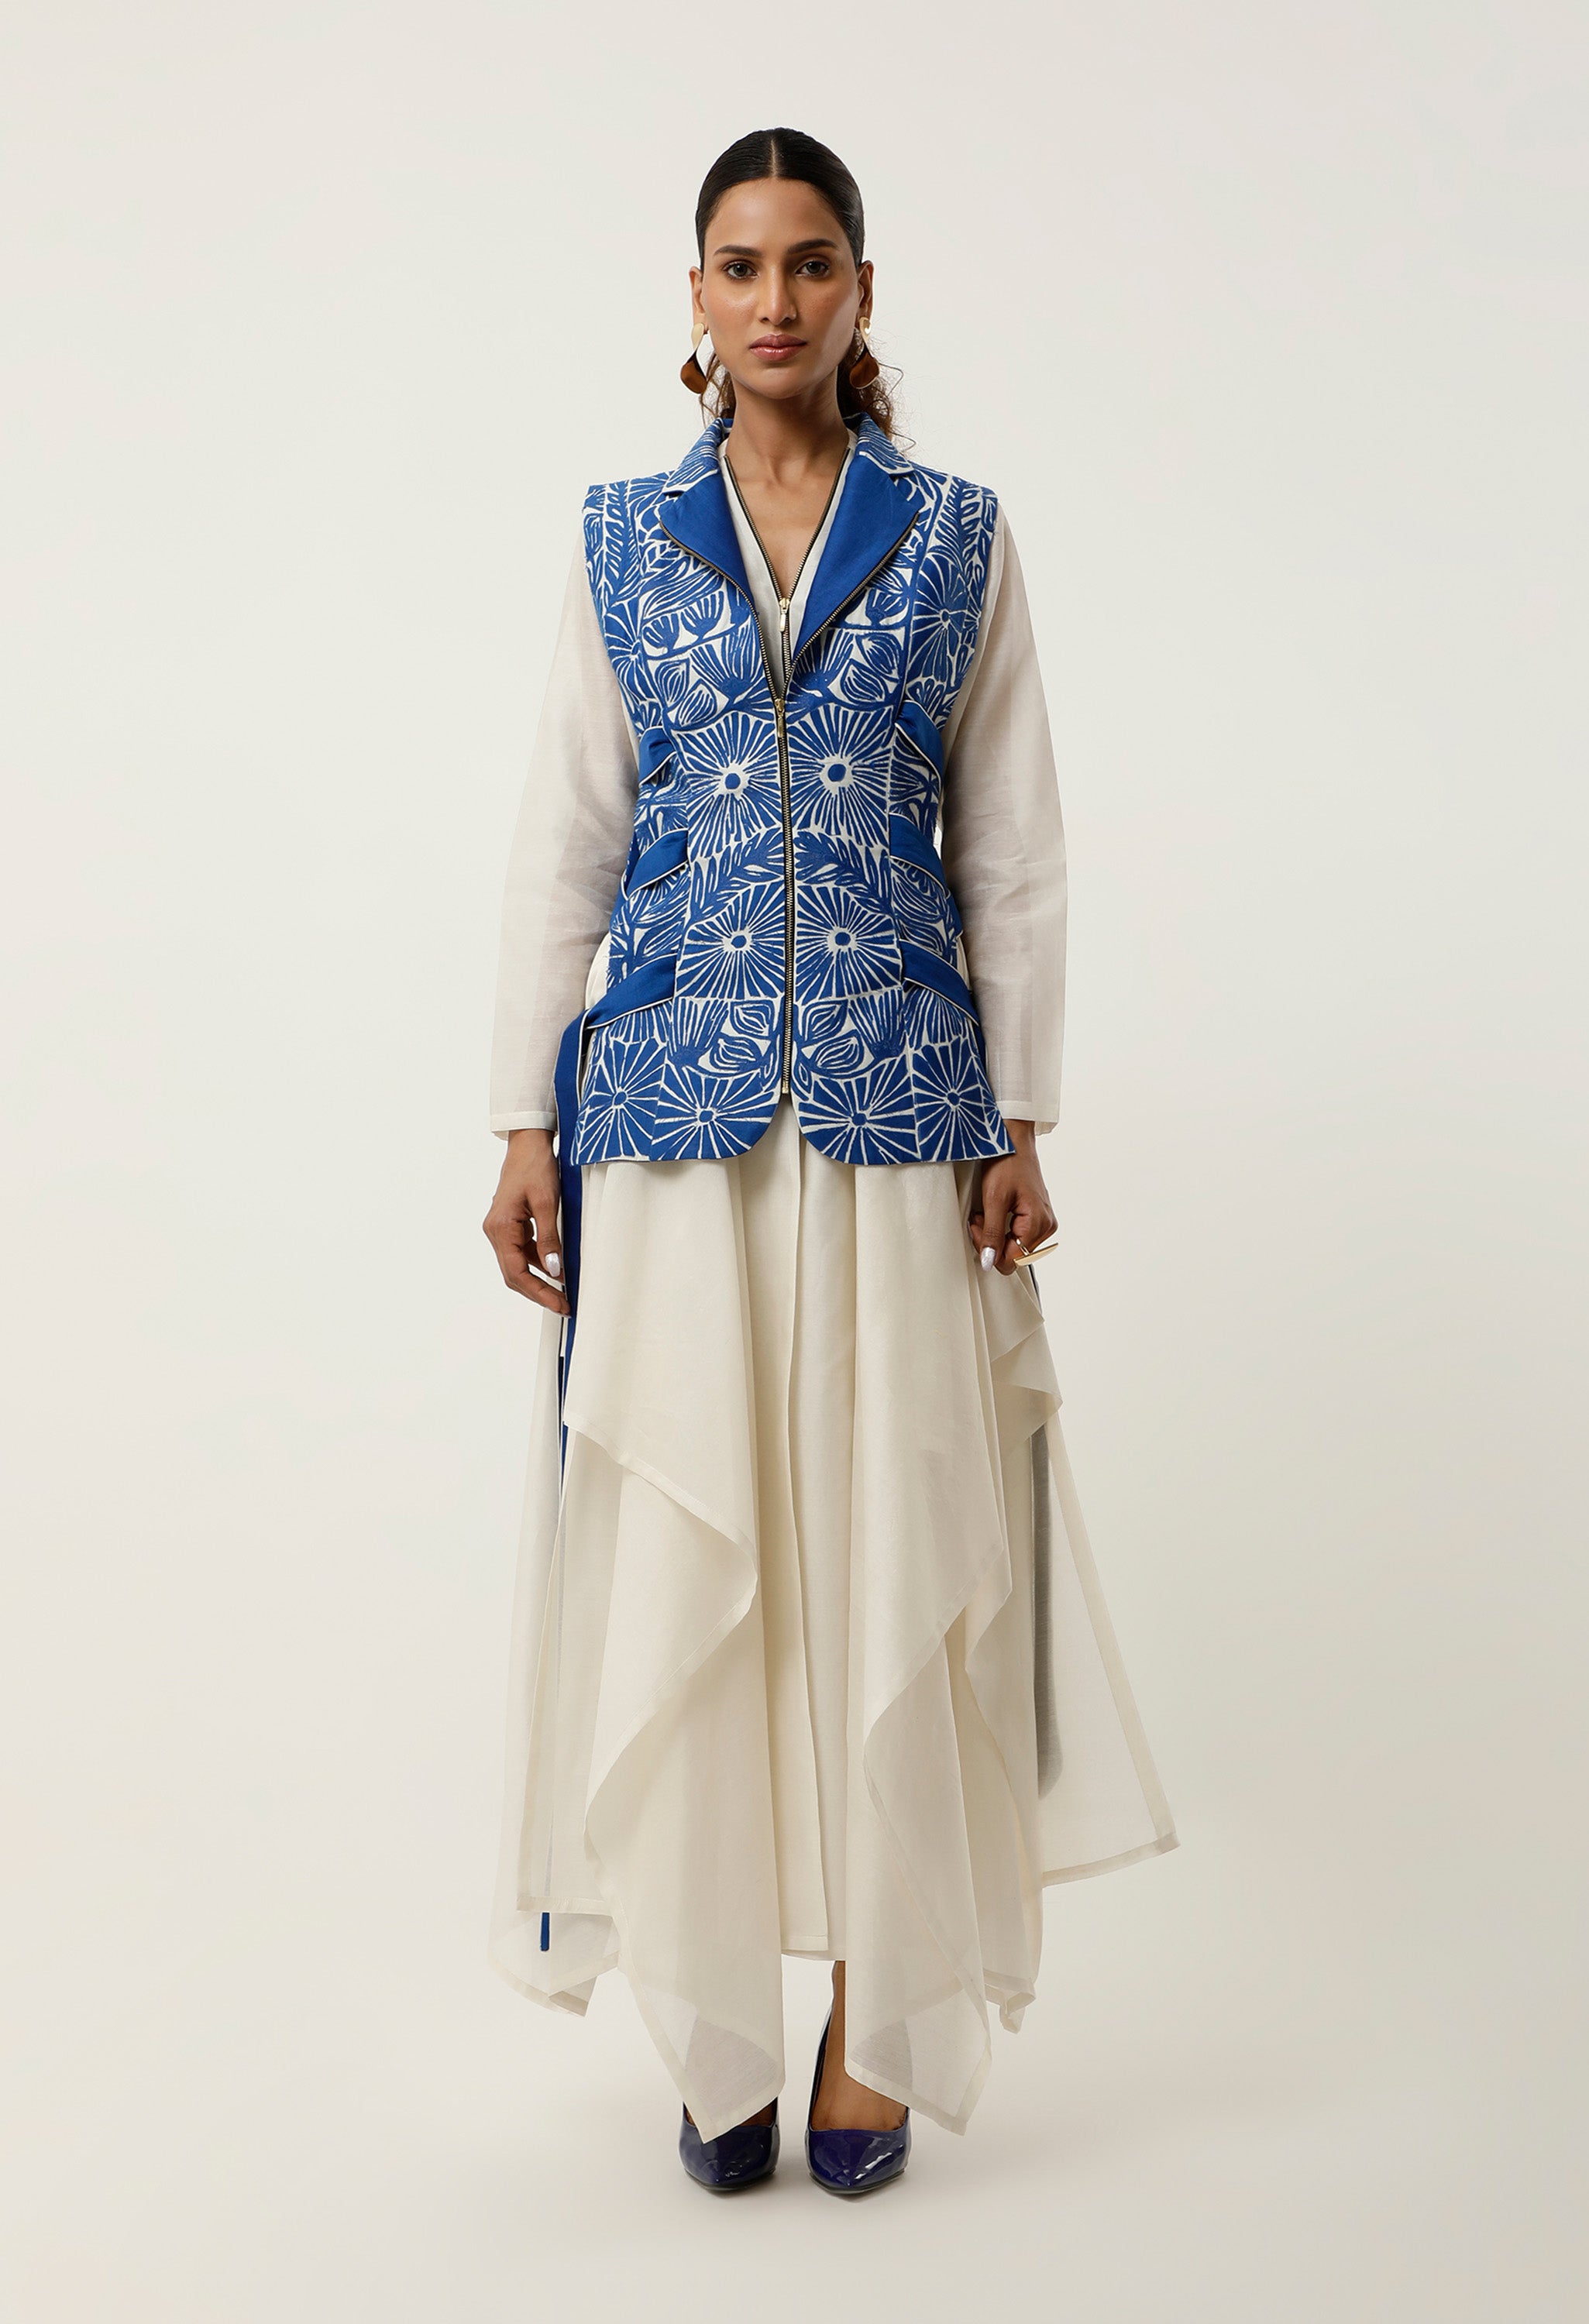 SIDE TIE UP CUTWORK JACKET WITH DRAPED INNER AND PANTS